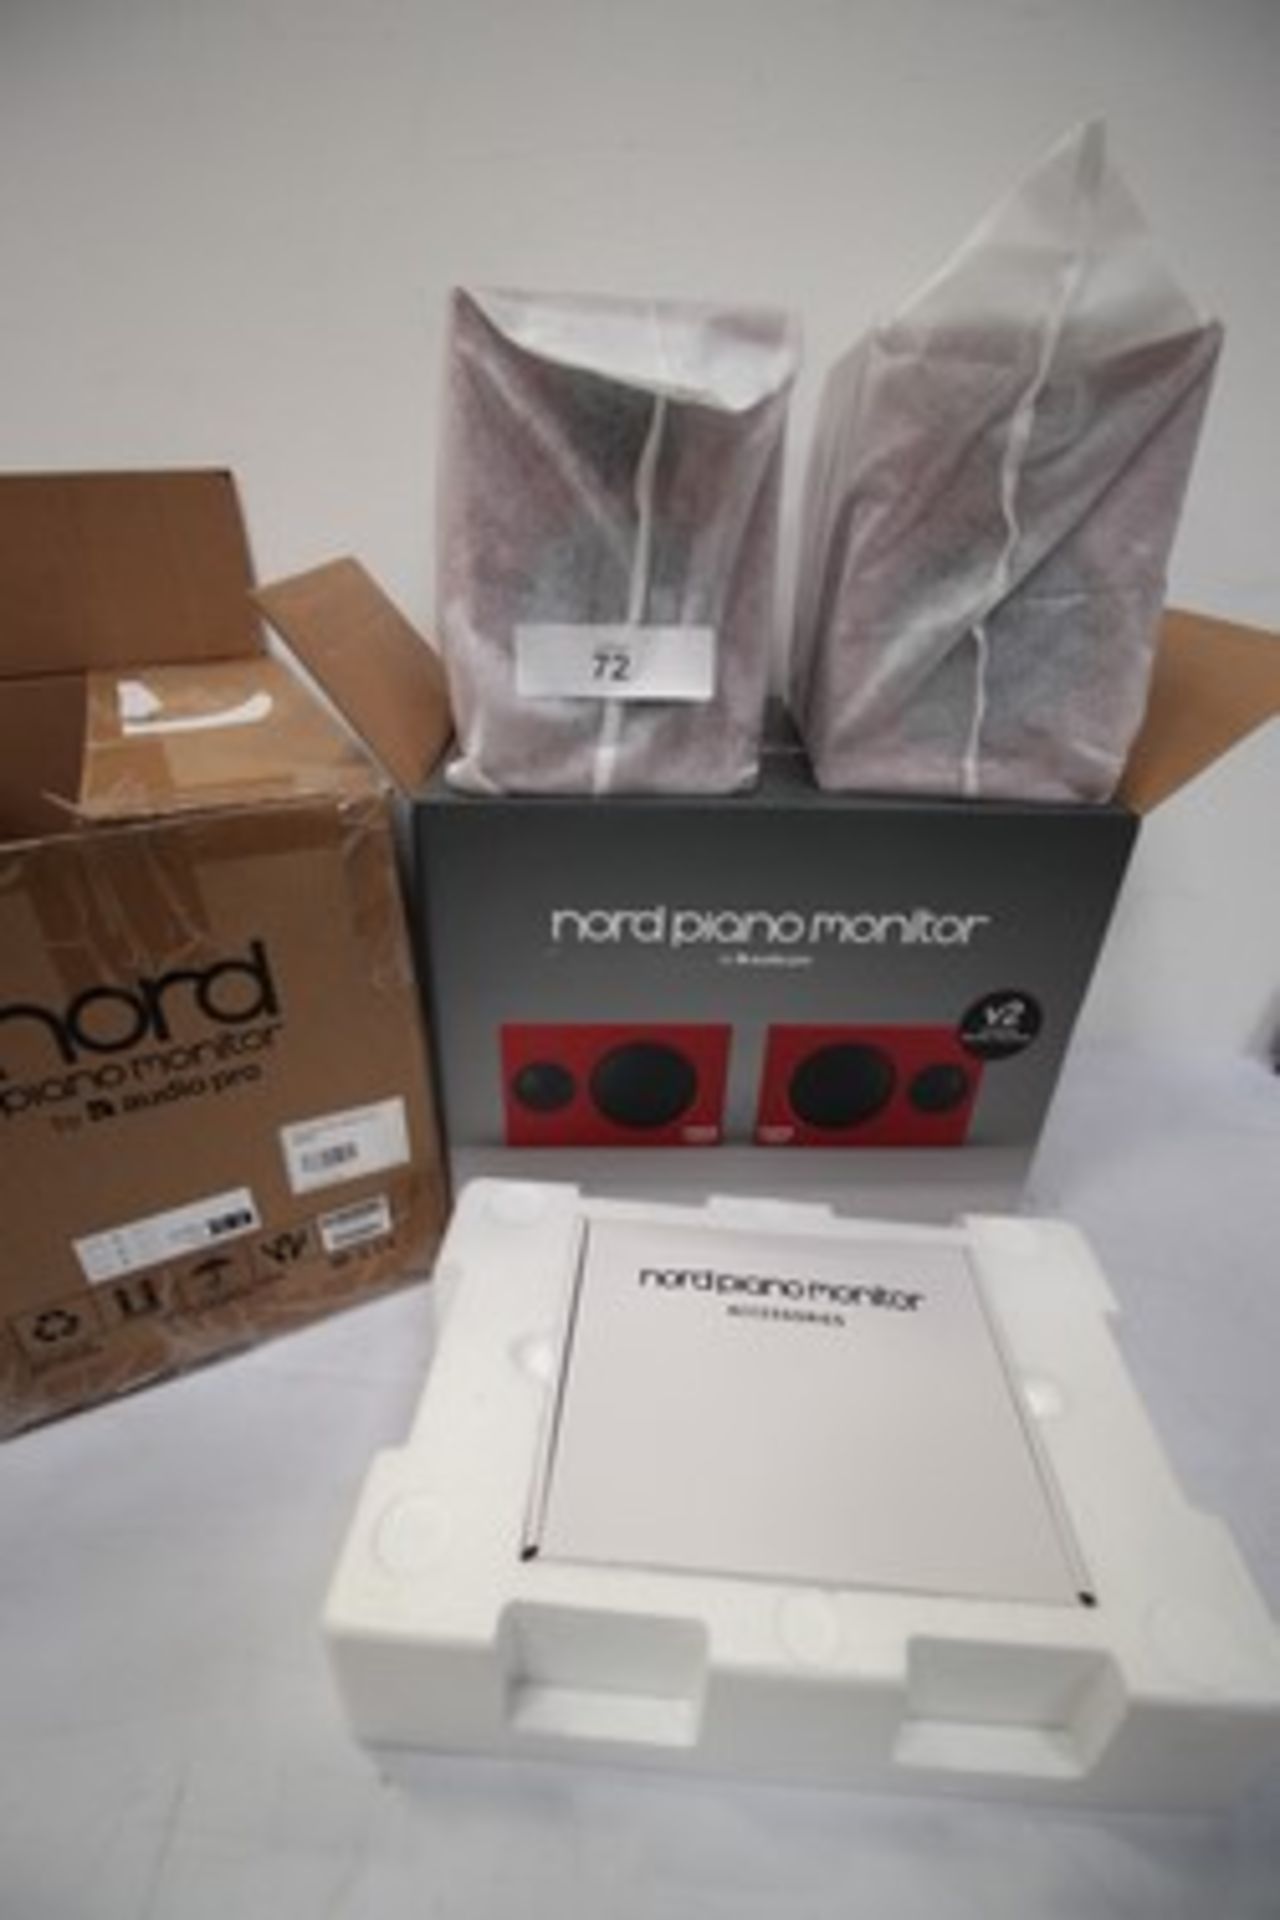 1 x pair of Clavia Nord V2 piano monitor speakers, Ref: 0834035001431 - new in box (ES8)